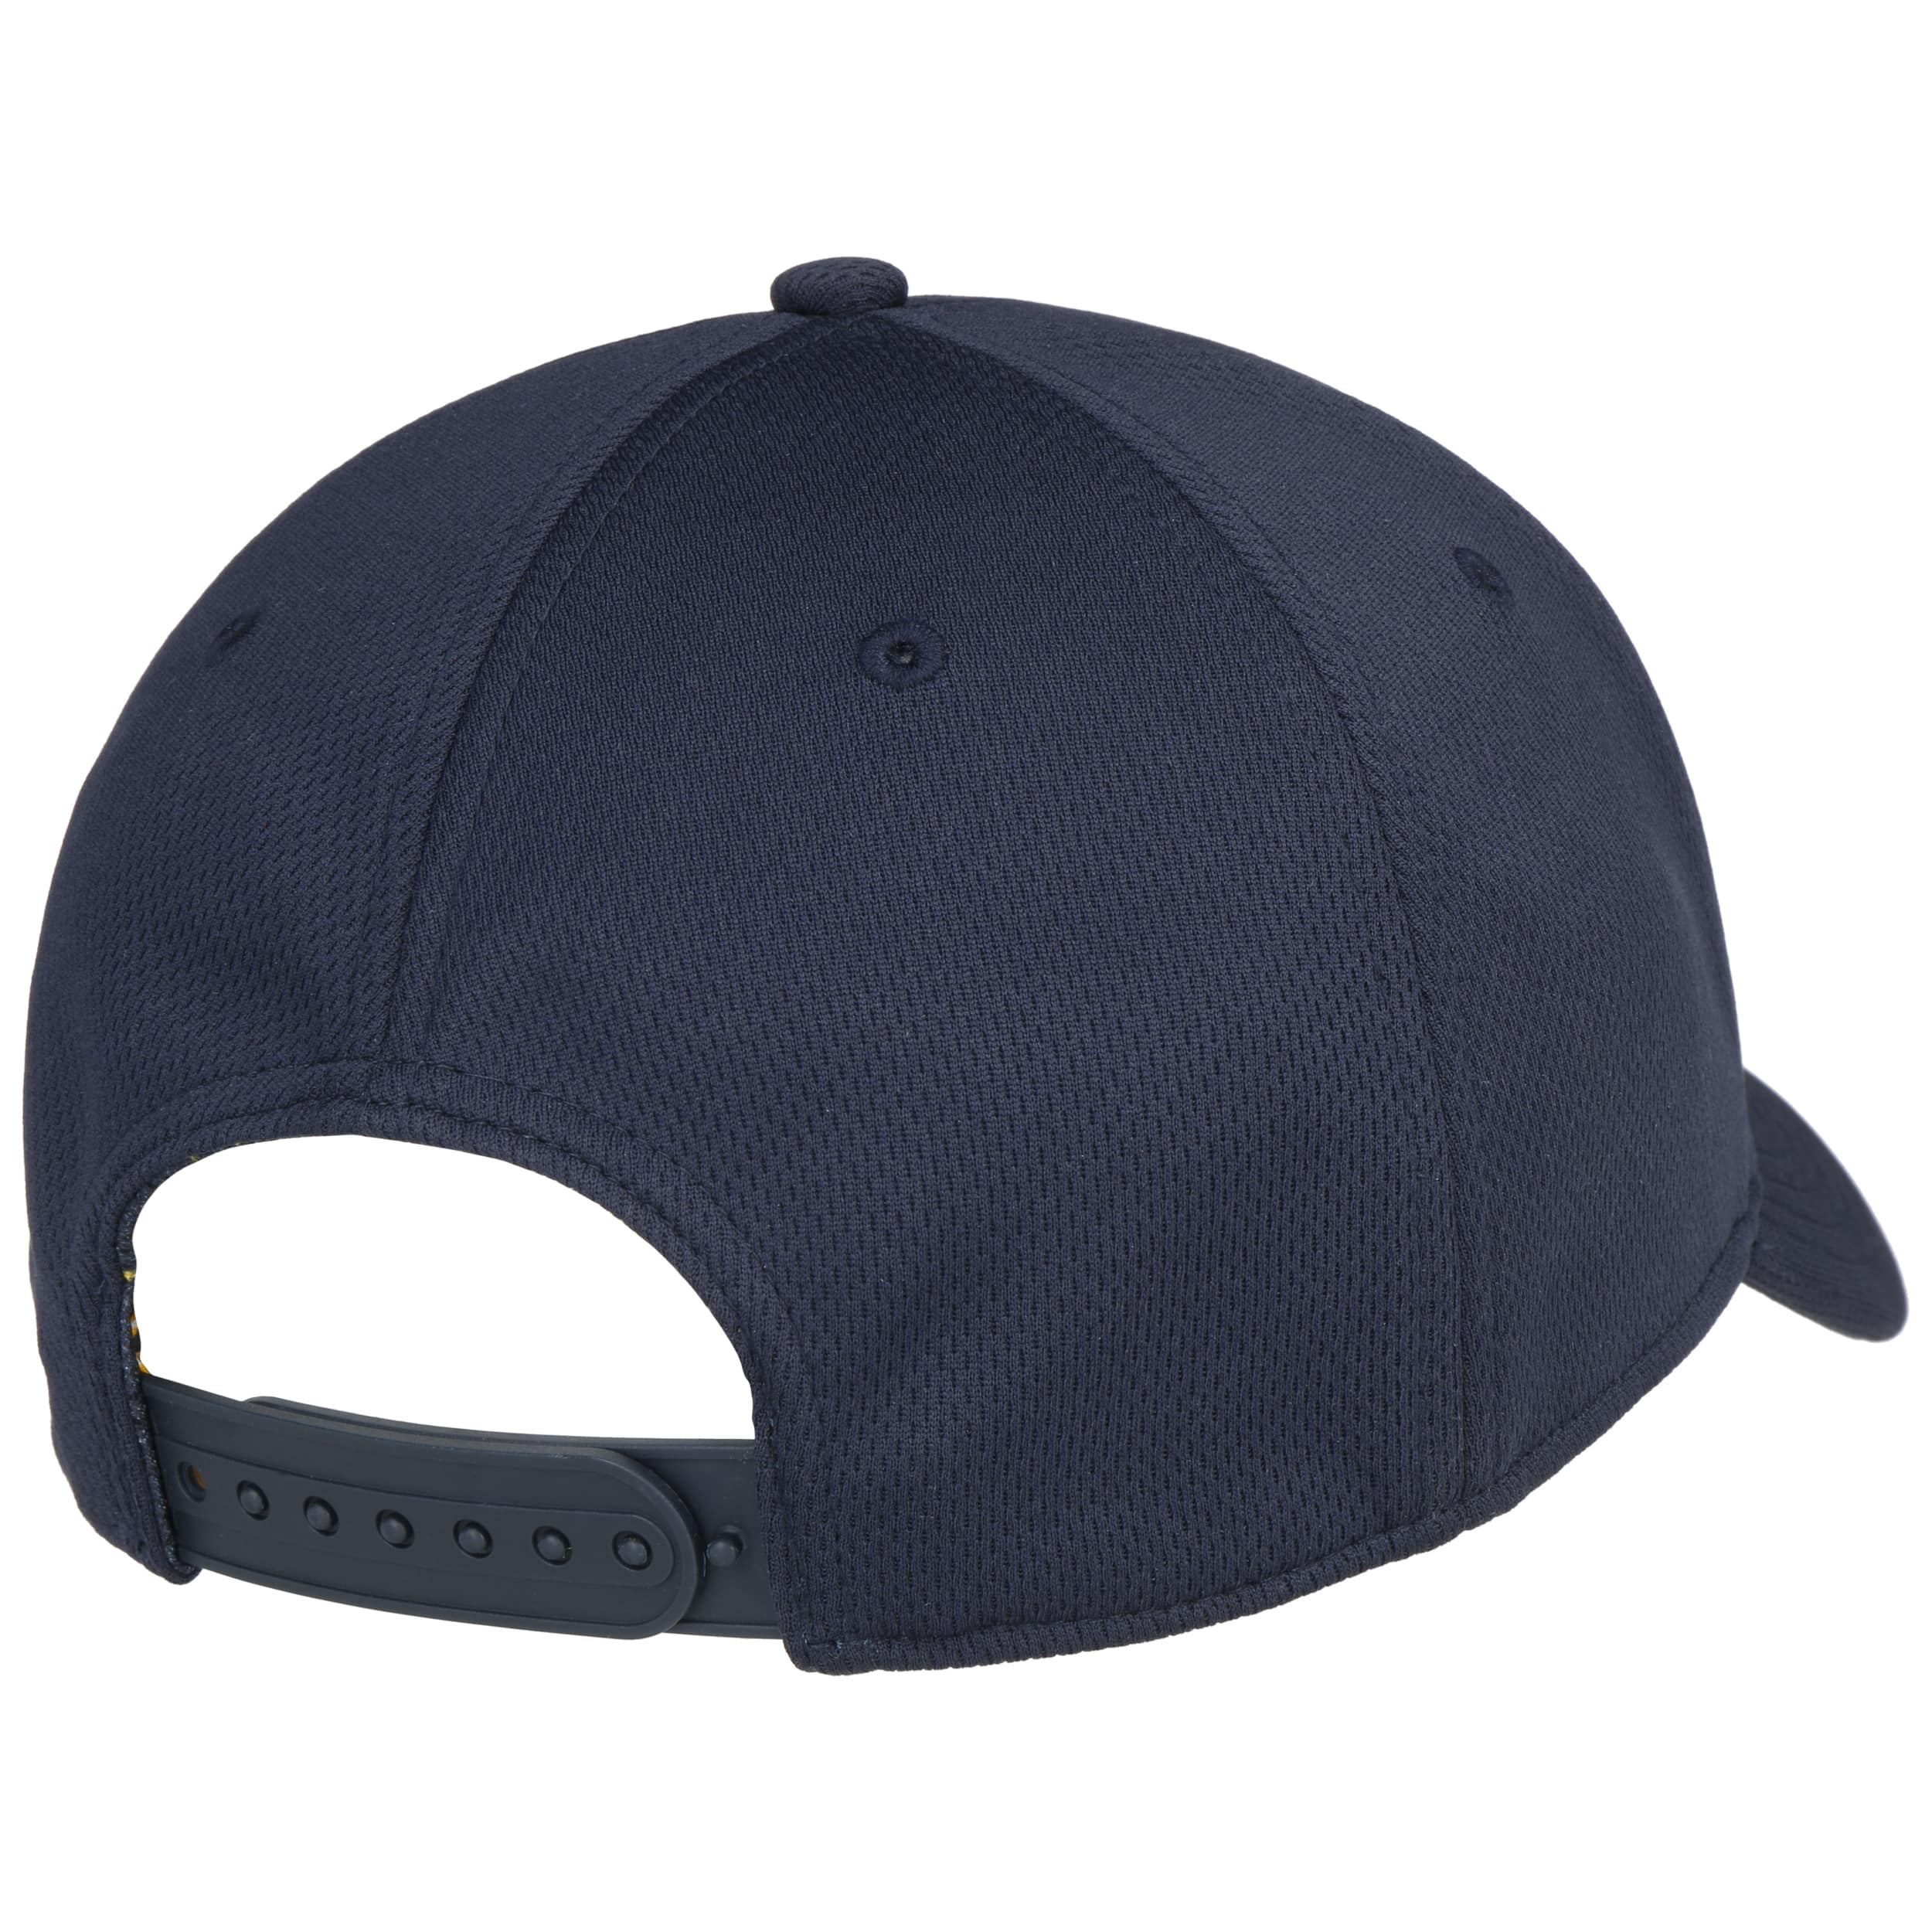 65 Cap by Stetson - 39,00